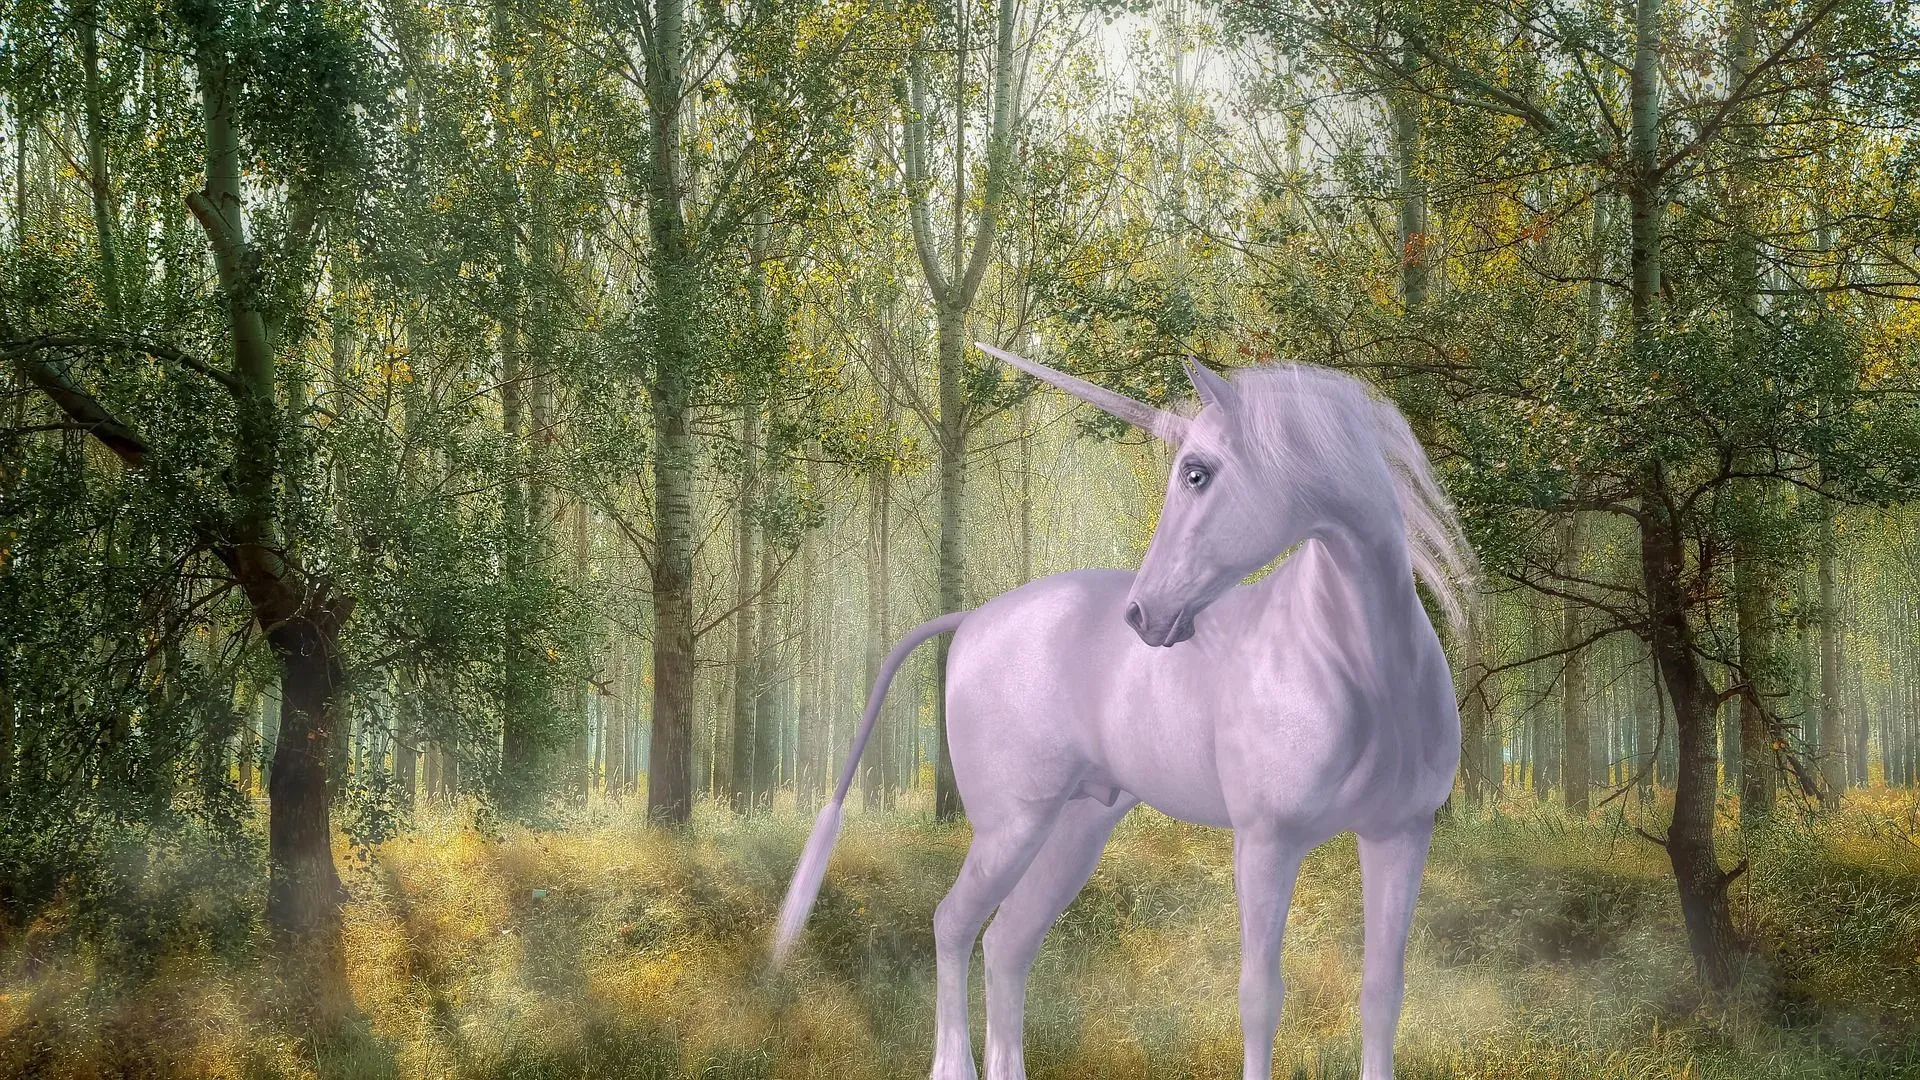 The unicorn was shown in ancient Mesopotamian art and was also mentioned in Indian and Chinese mythology.